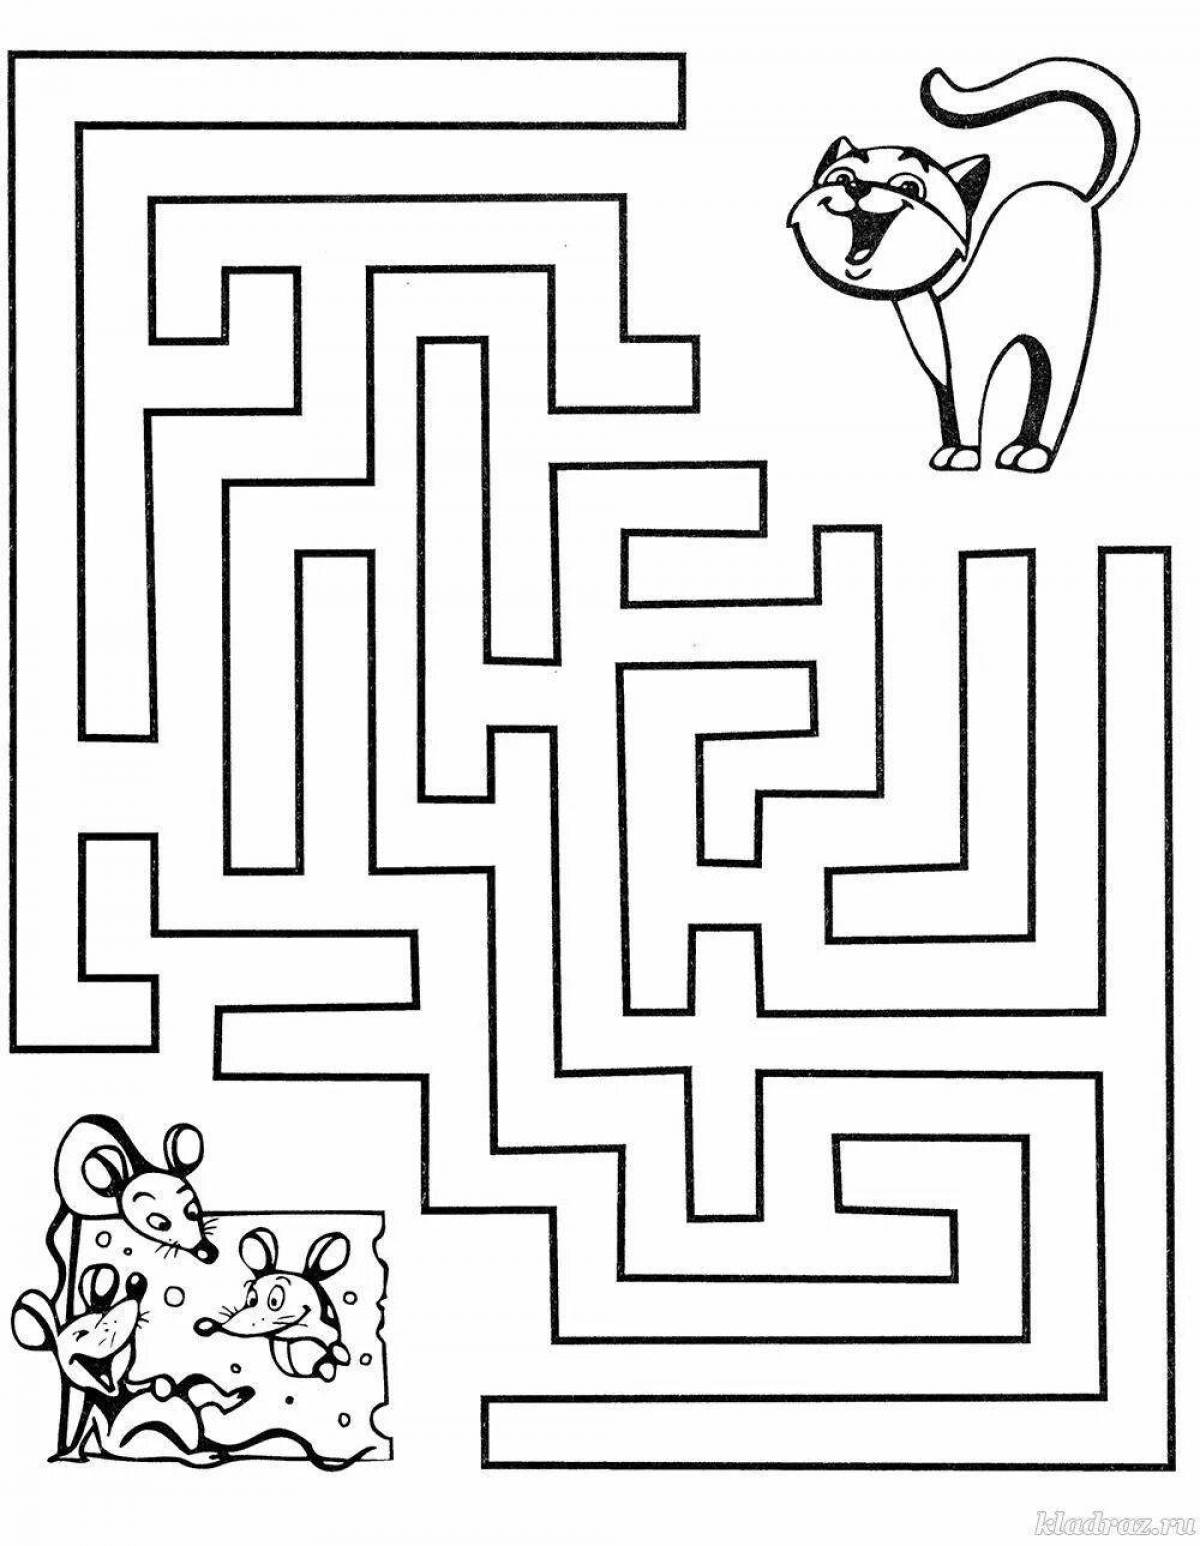 Mazes for children 4 5 years old #9